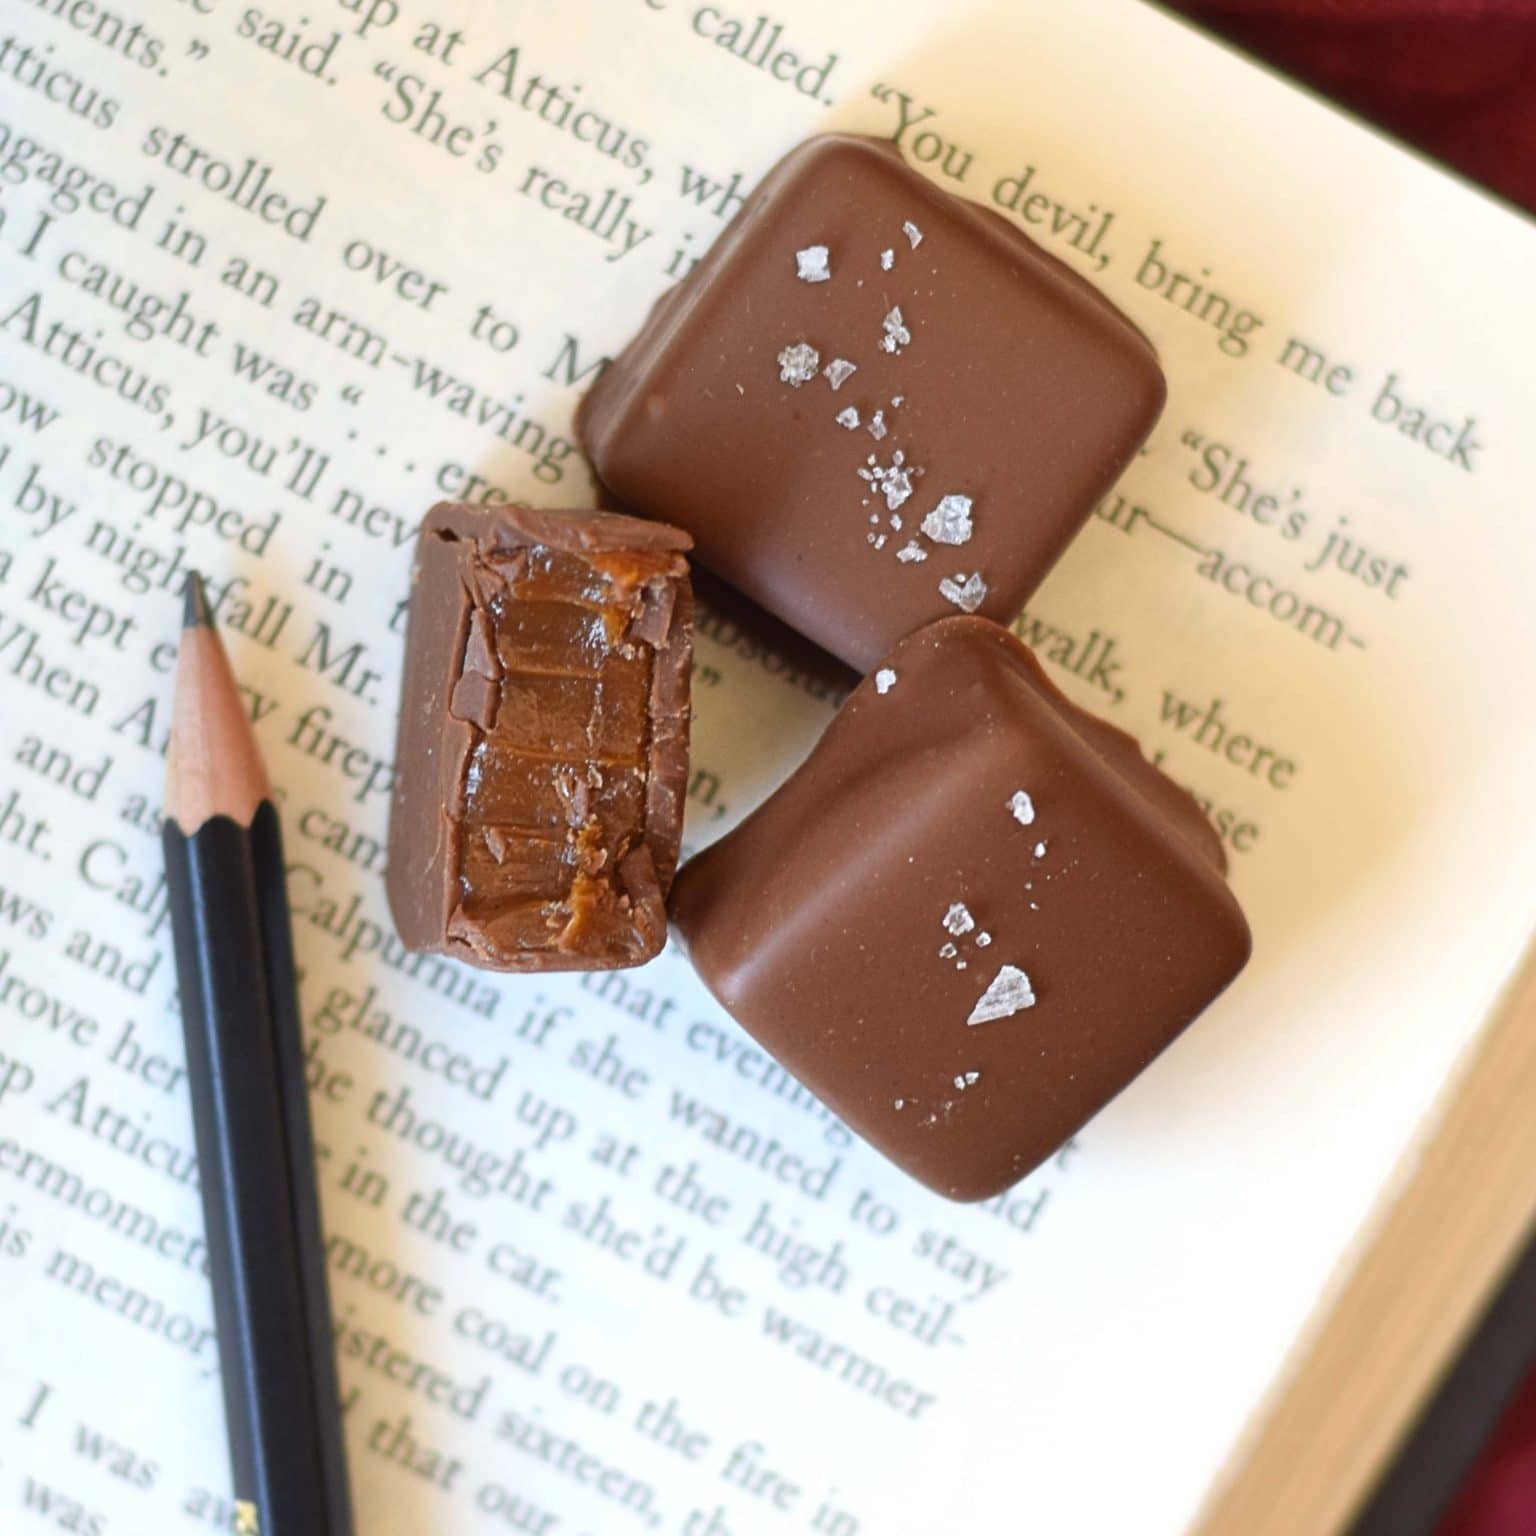 Three gourmet milk chocolate sea salt caramels sitting on an open book. One truffle has a bite taken out of it.